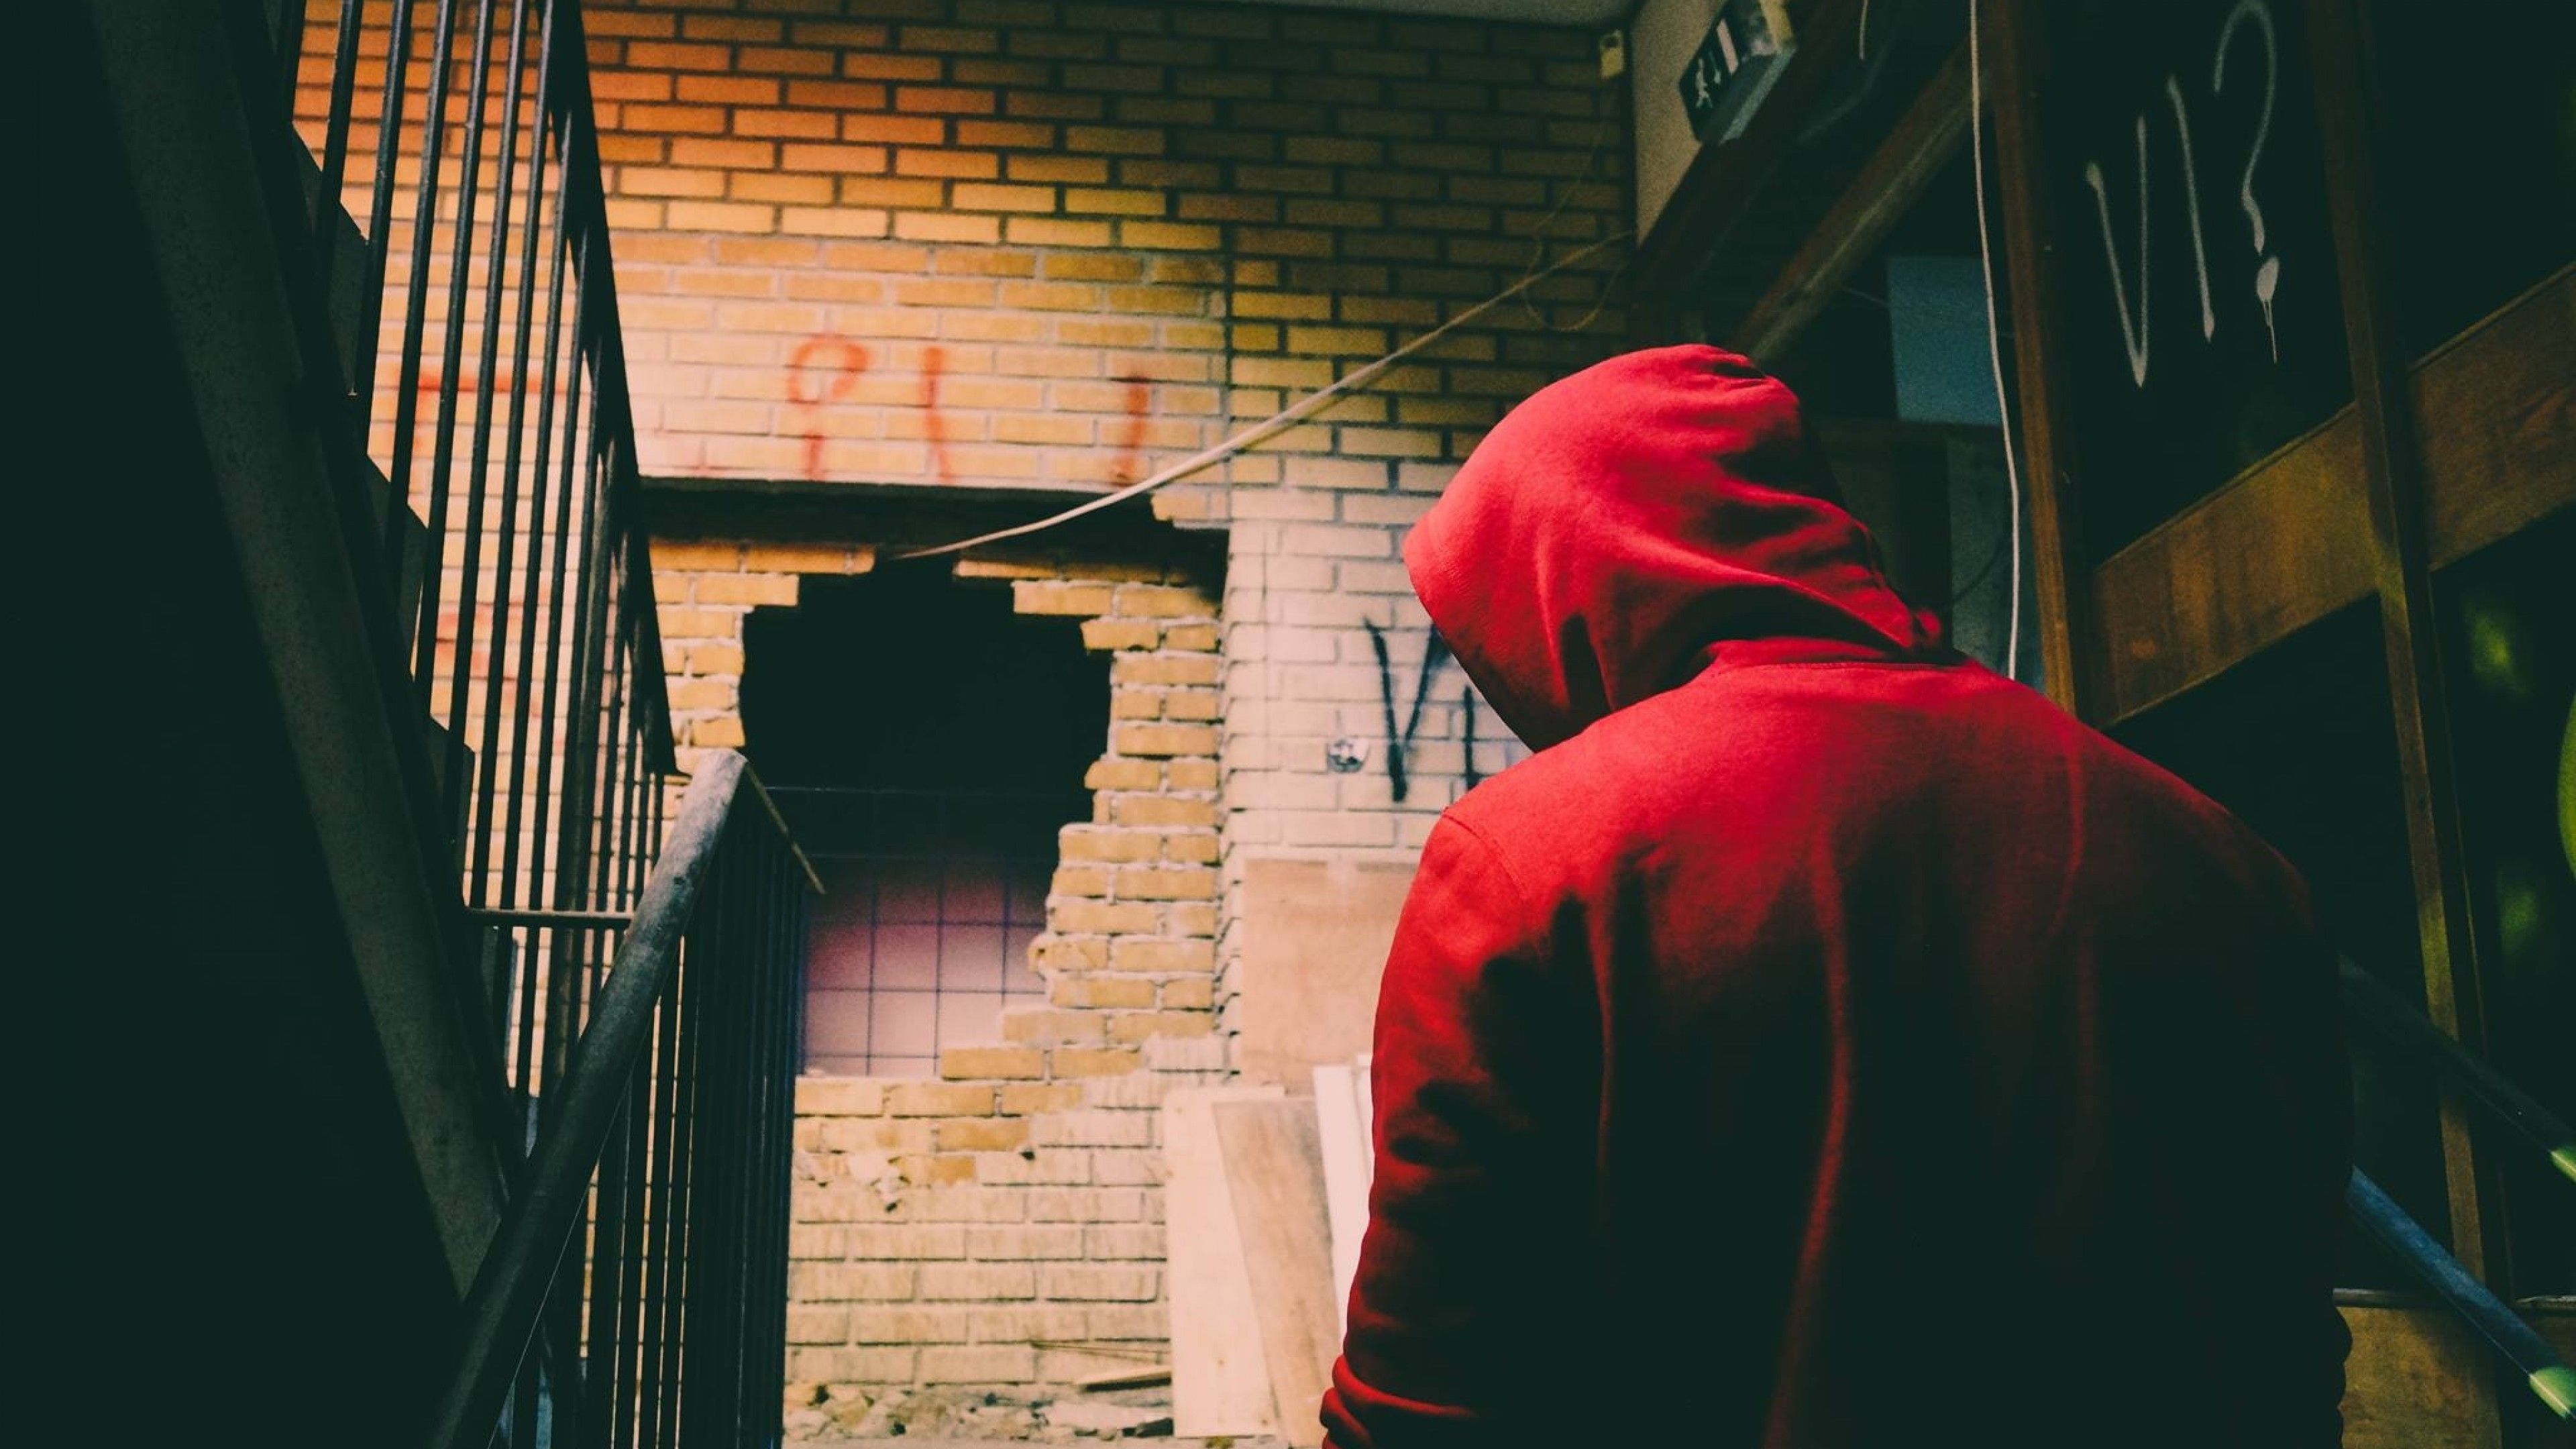 Download 3840x2160 Man, Red Hoodie, Staircase, Abandoned Wallpaper for UHD TV